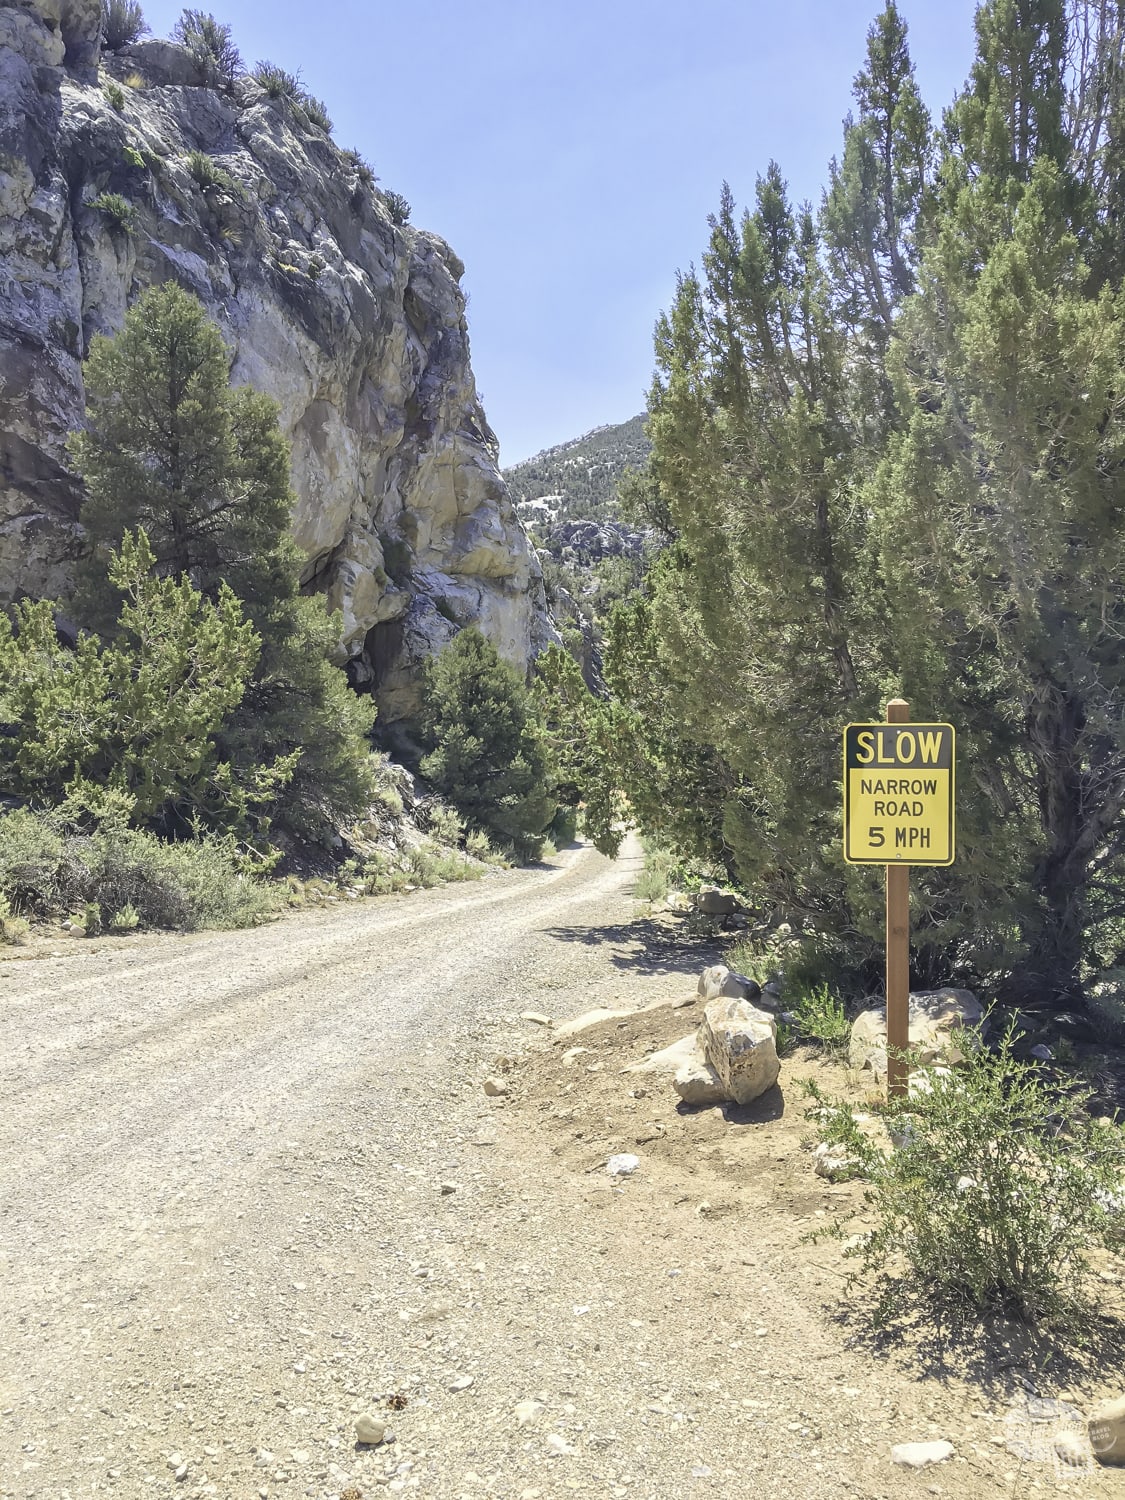 You can explore several dirt roads at Great Basin NP.